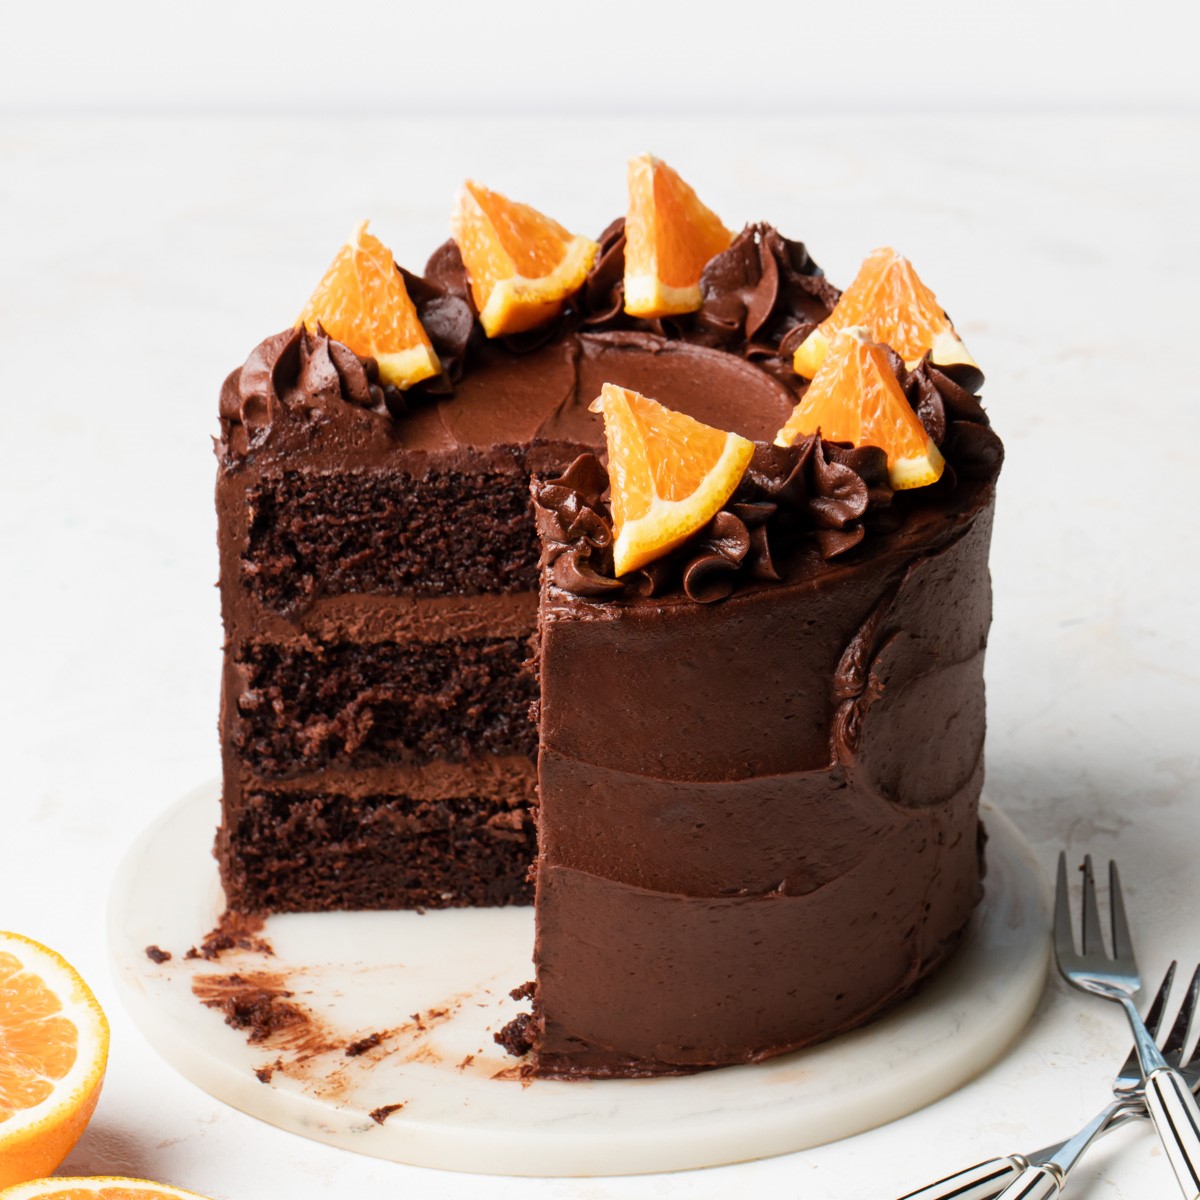 Indulge Your Senses with Fudgy Chocolate and Orange Gateau - A Decadent Dessert Delight!.jpg